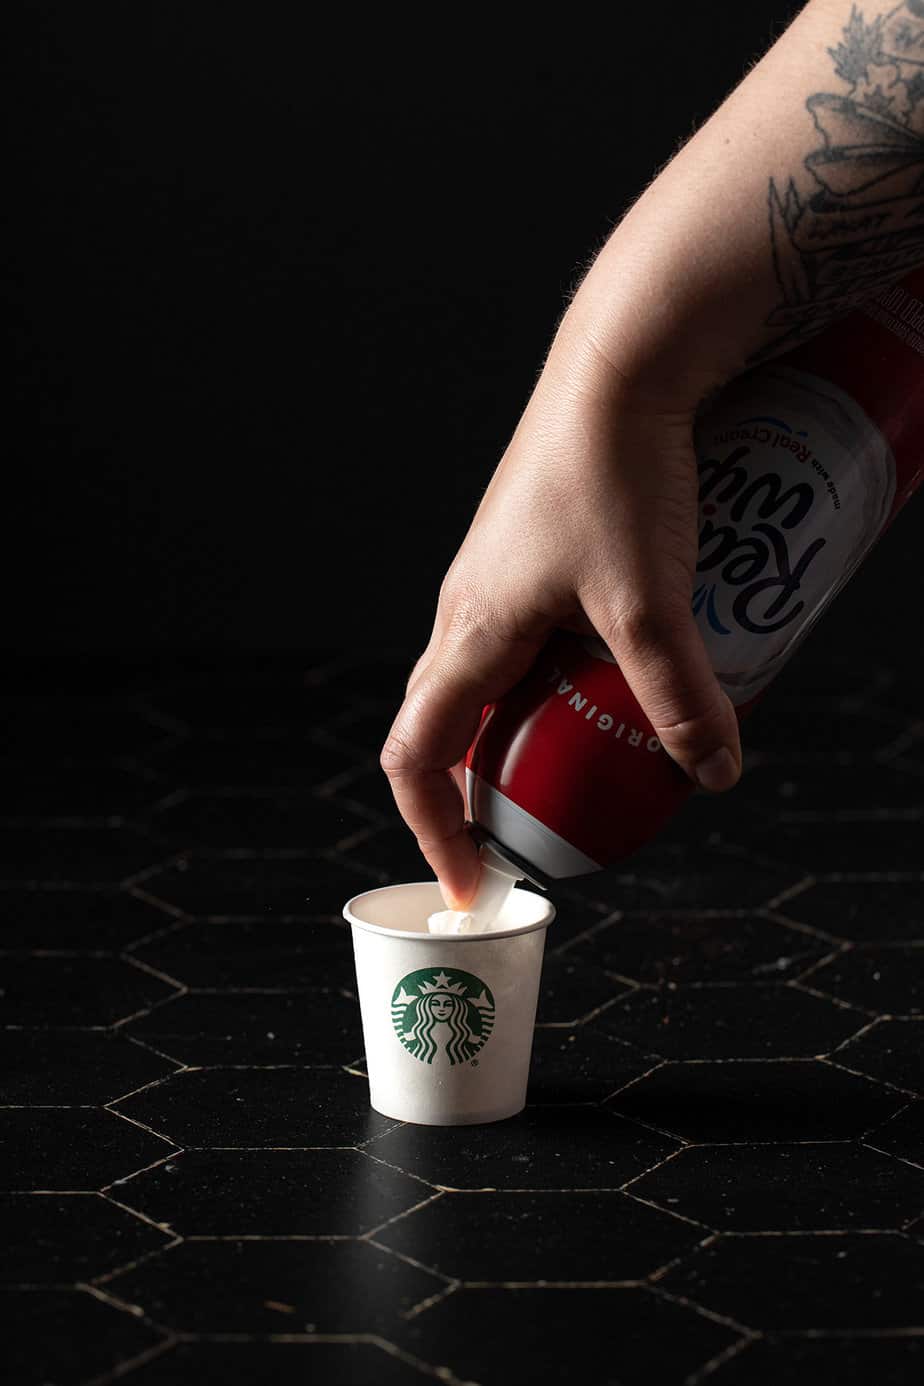 whipped cream being squirted into an espresso cup from starbucks